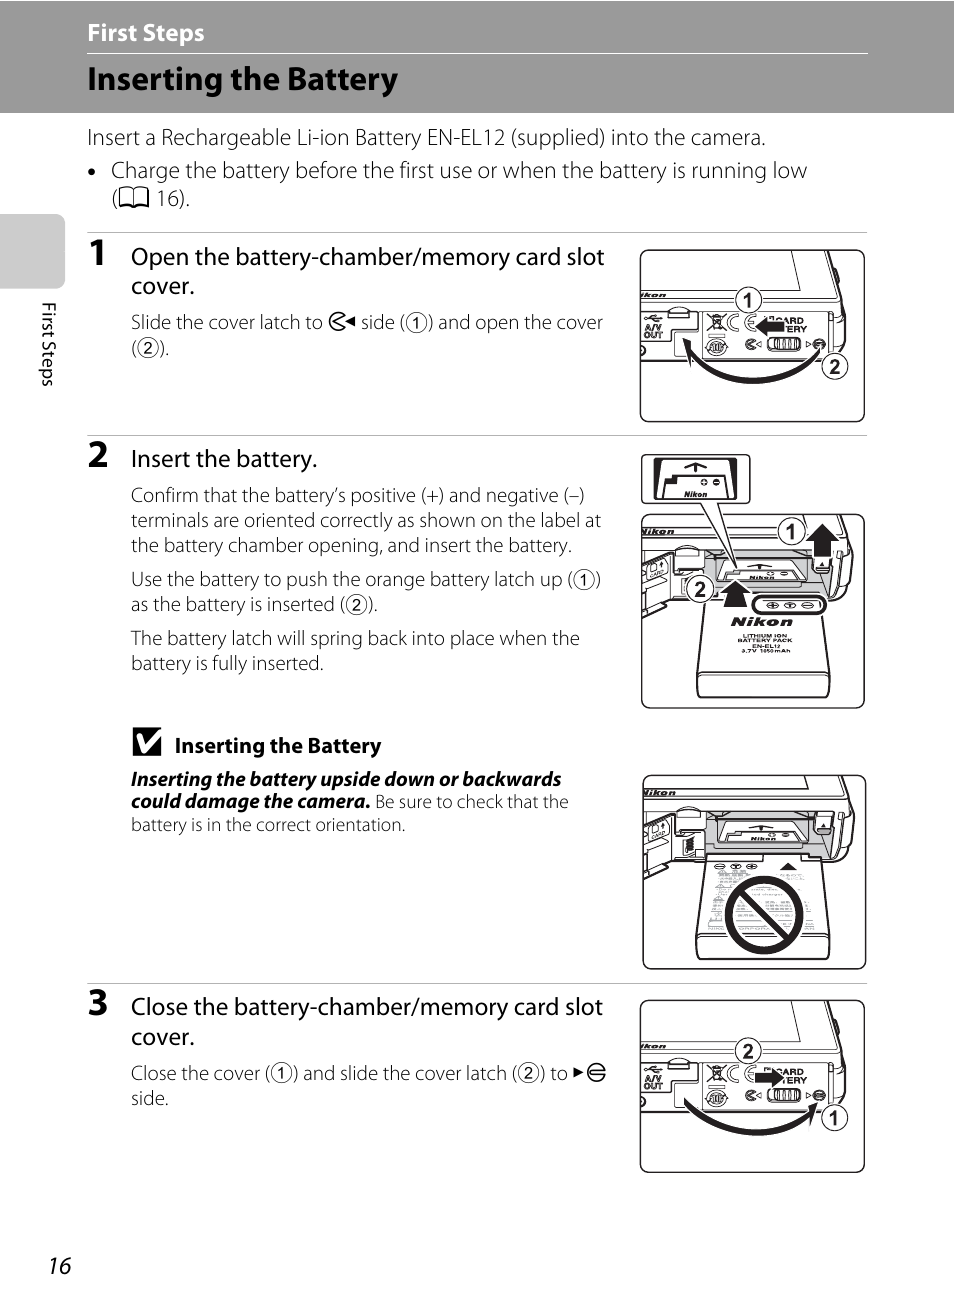 First steps, Inserting the battery | Nikon S70 User Manual | Page 28 / 192